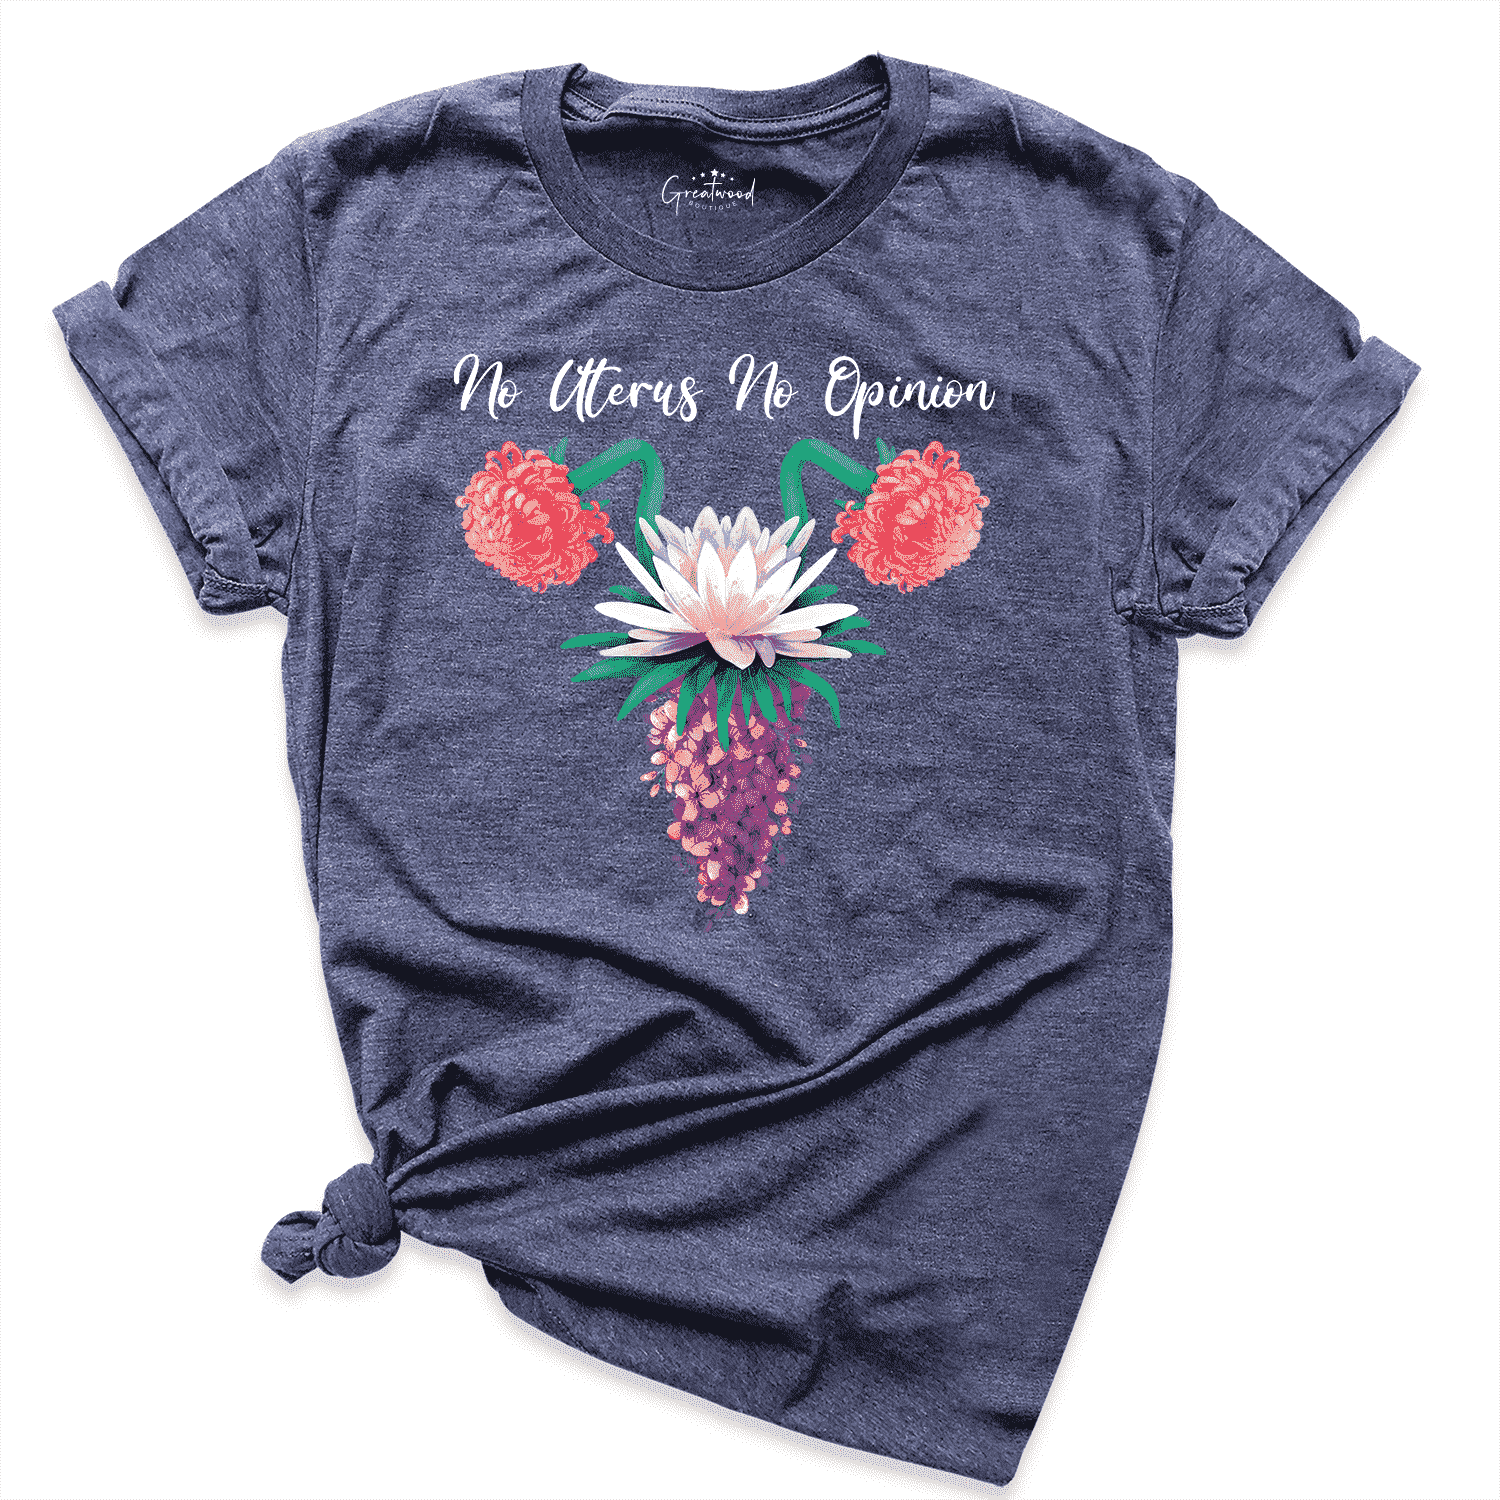 No uterus No opinion shirt Navy - Greatwood Boutique